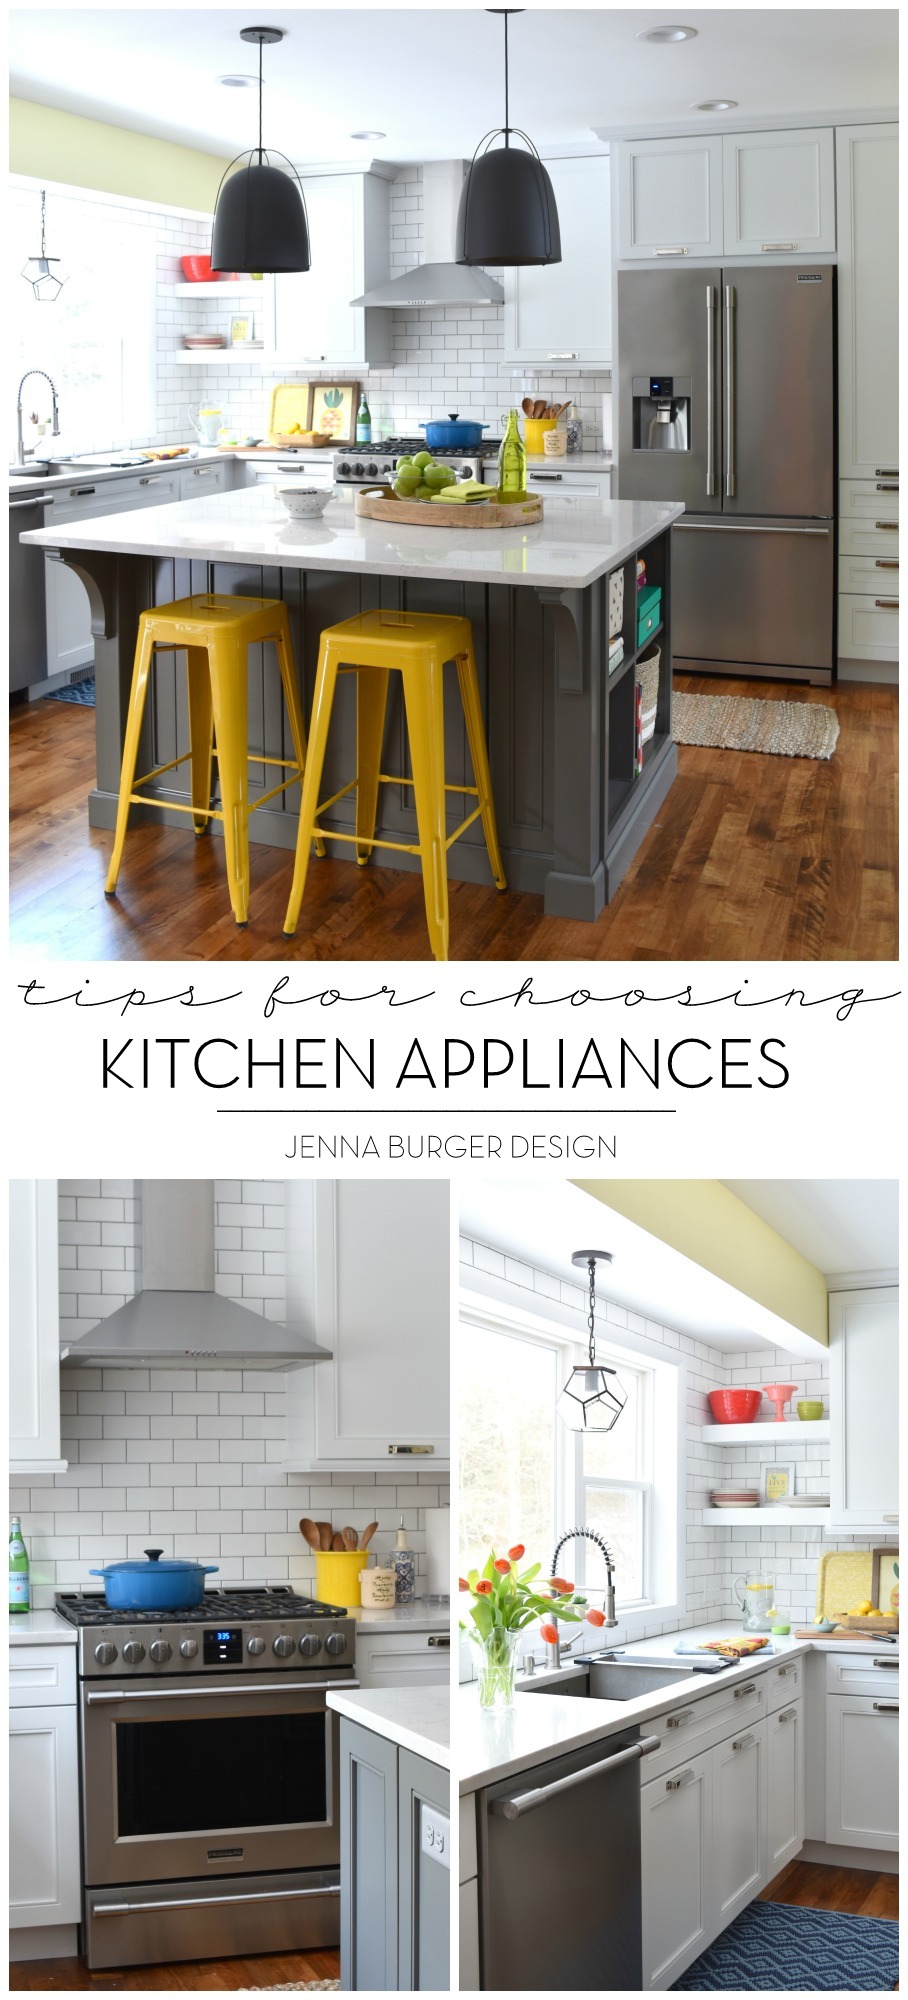 Tips for CHOOSING KITCHEN APPLIANCES. I just finished a kitchen renovation and share my tips from shopping + why I chose the appliances I did . www.JennaBurger.com